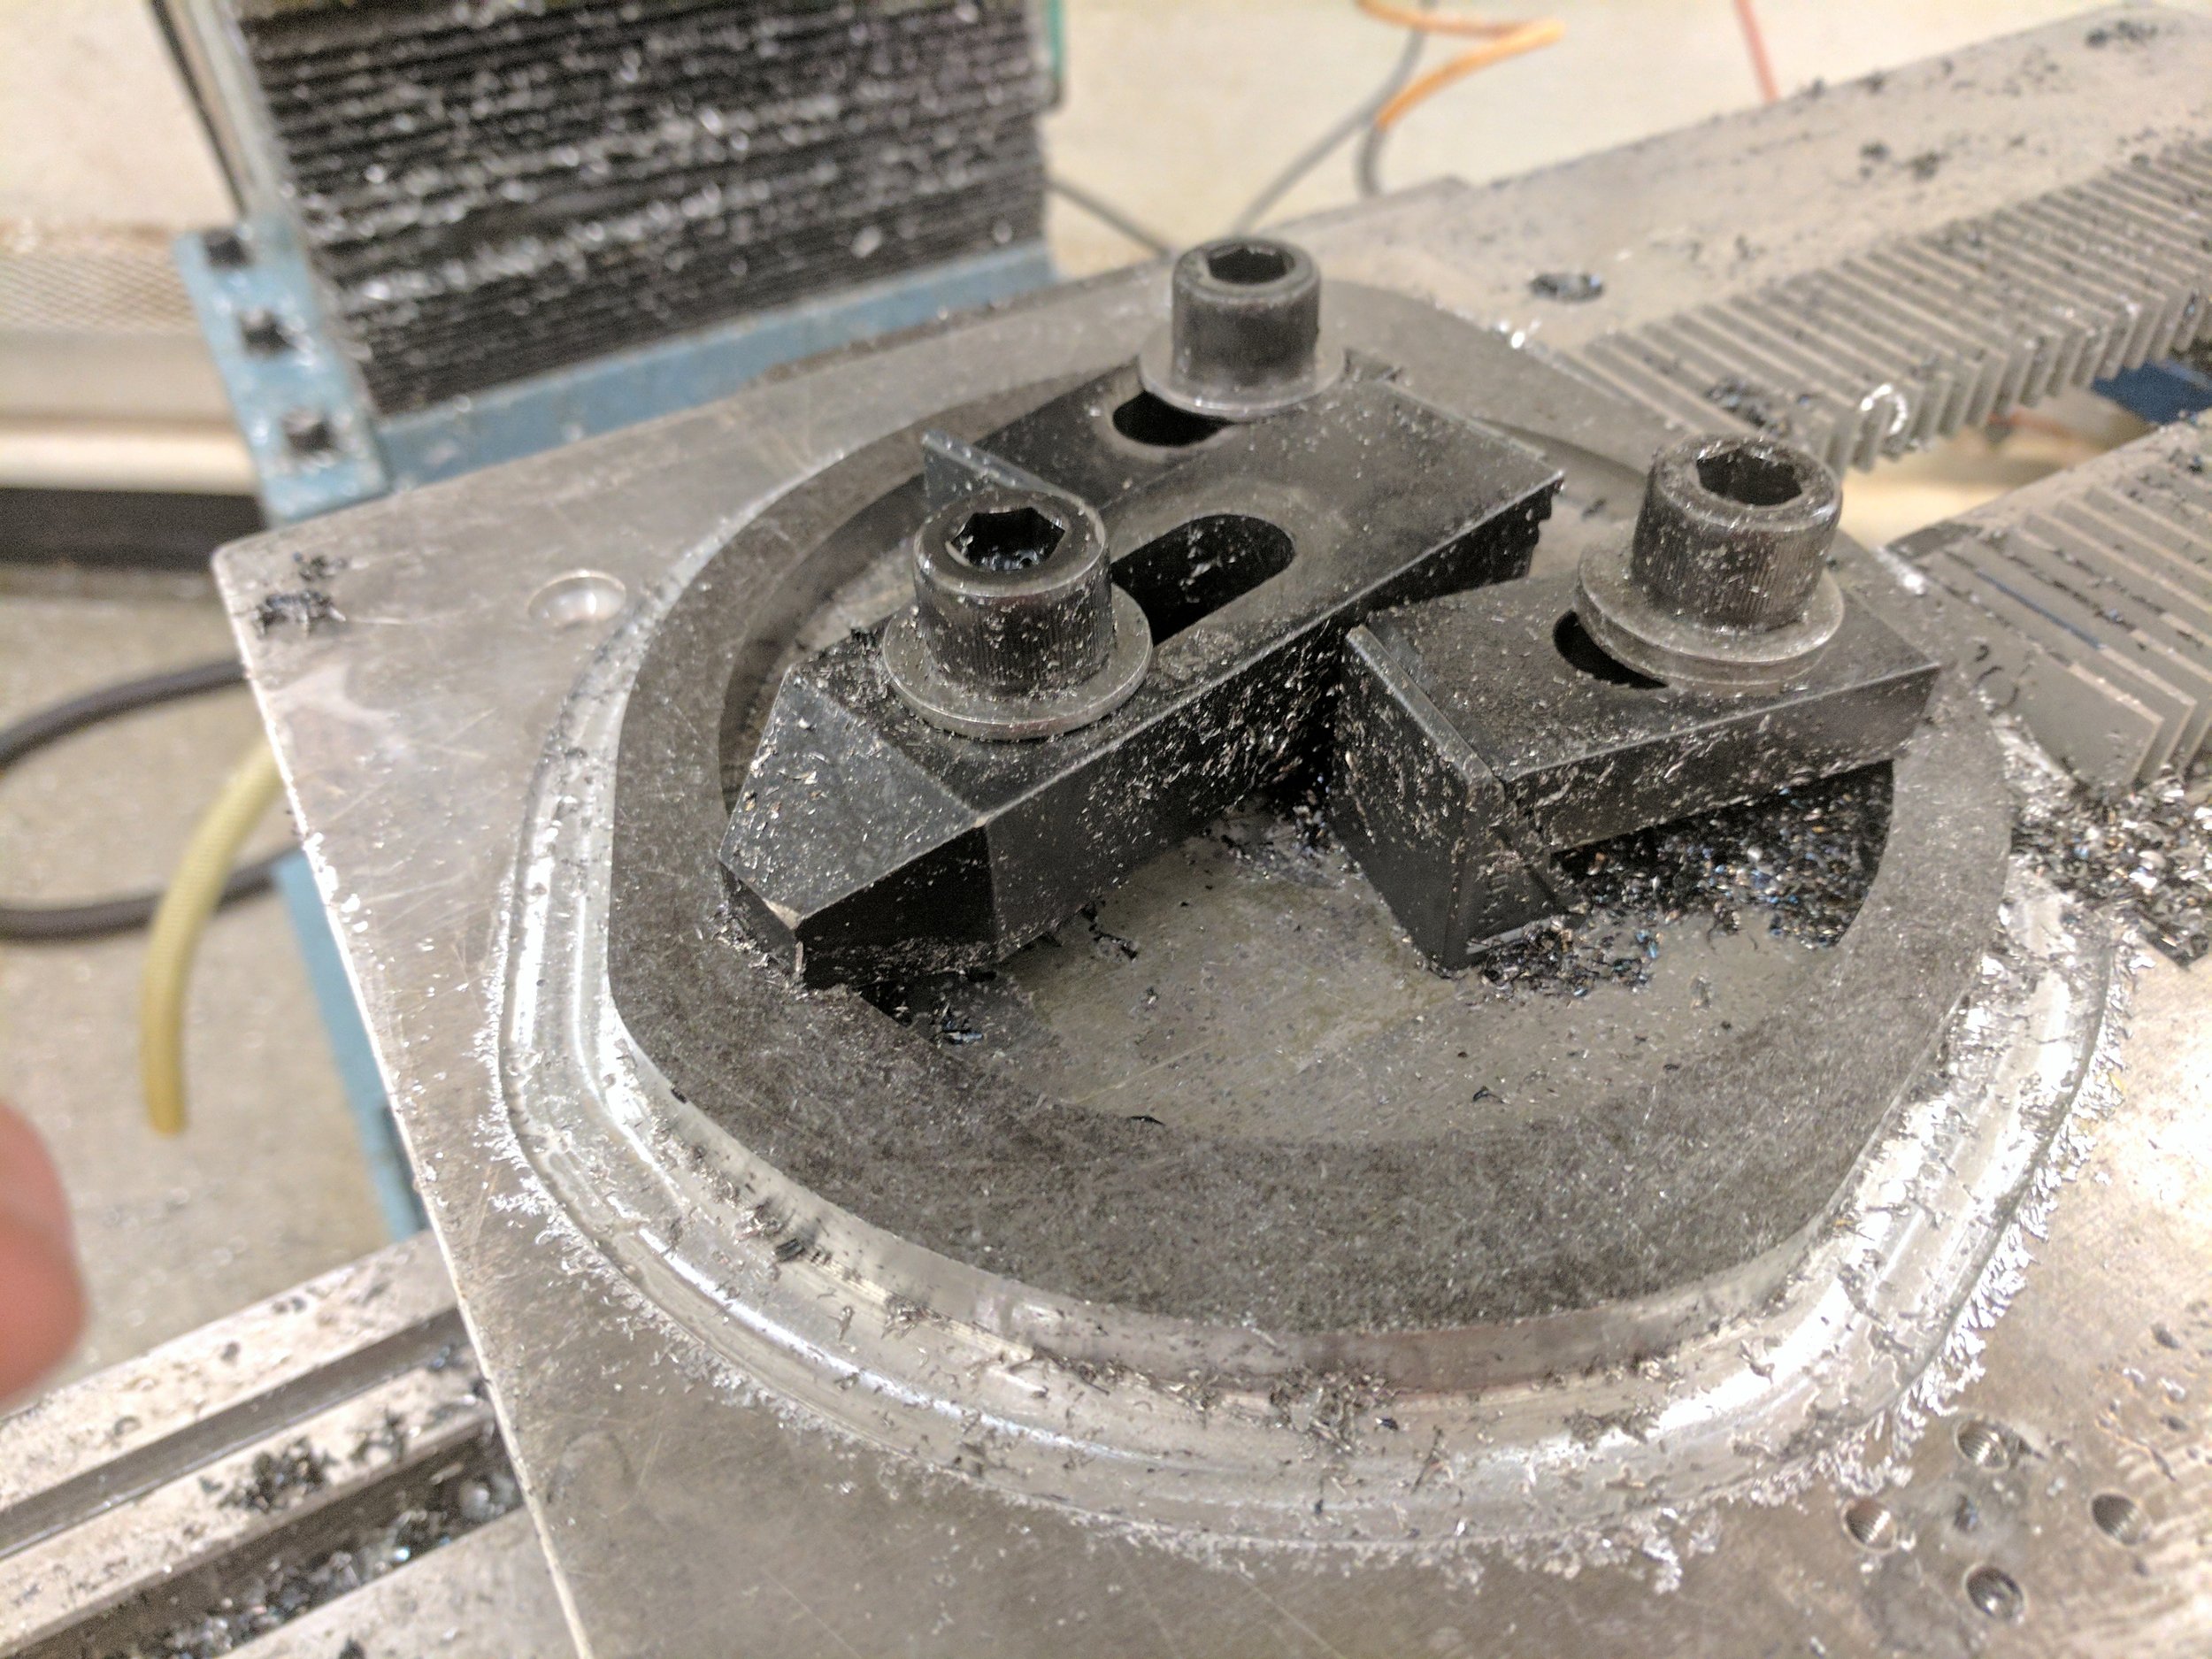 Machining almost complete